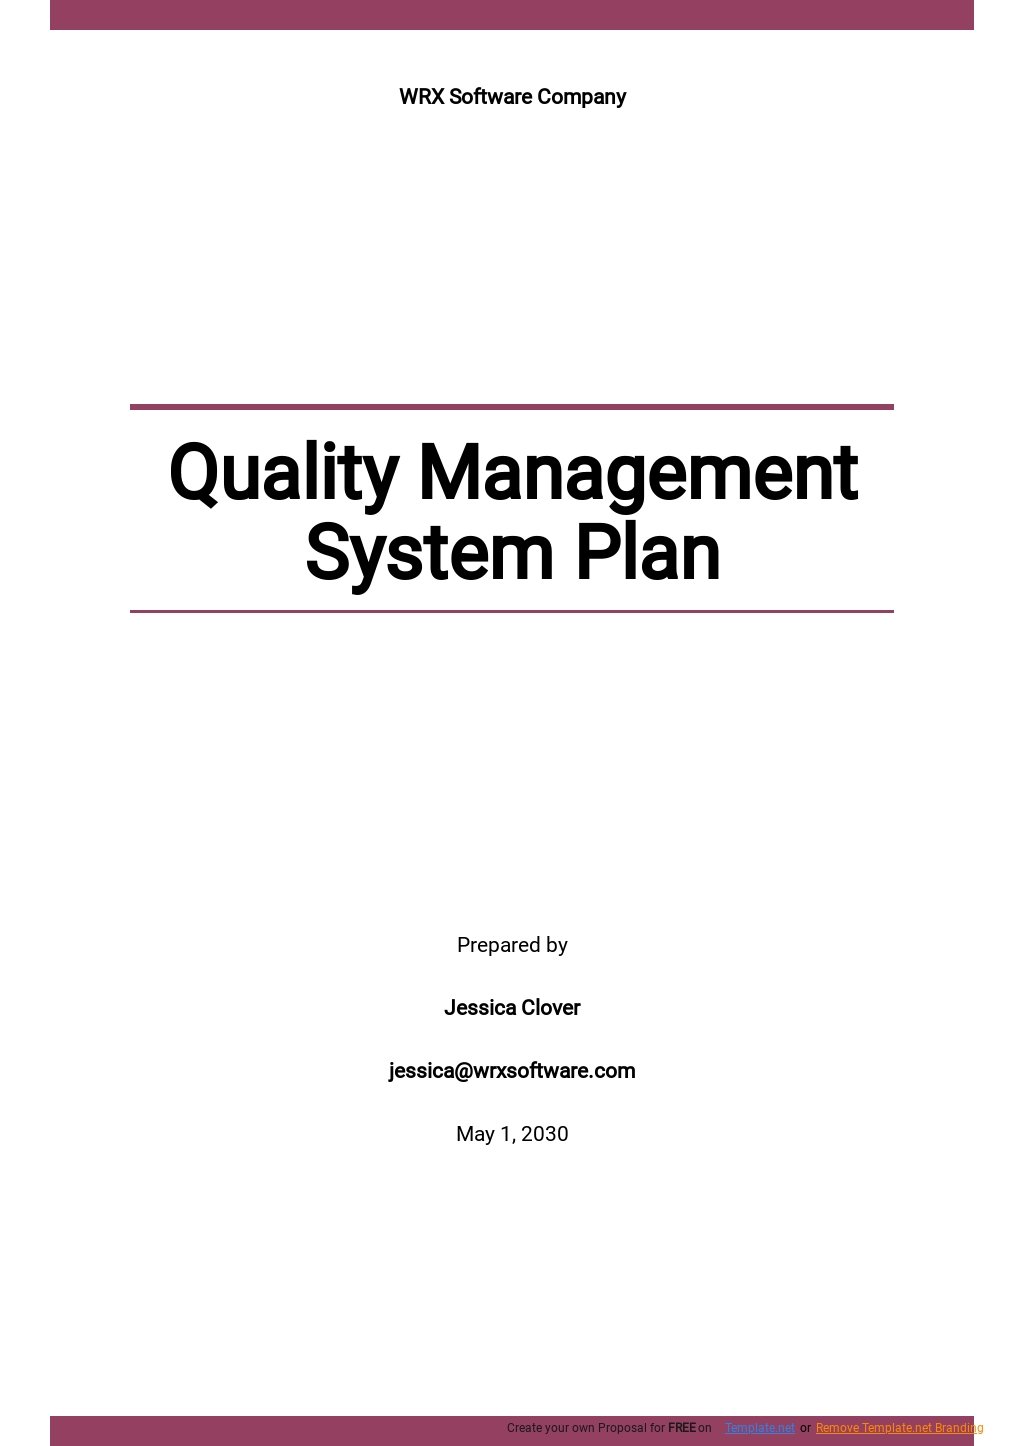 Quality Management System Plan Template Google Docs, Word, Apple